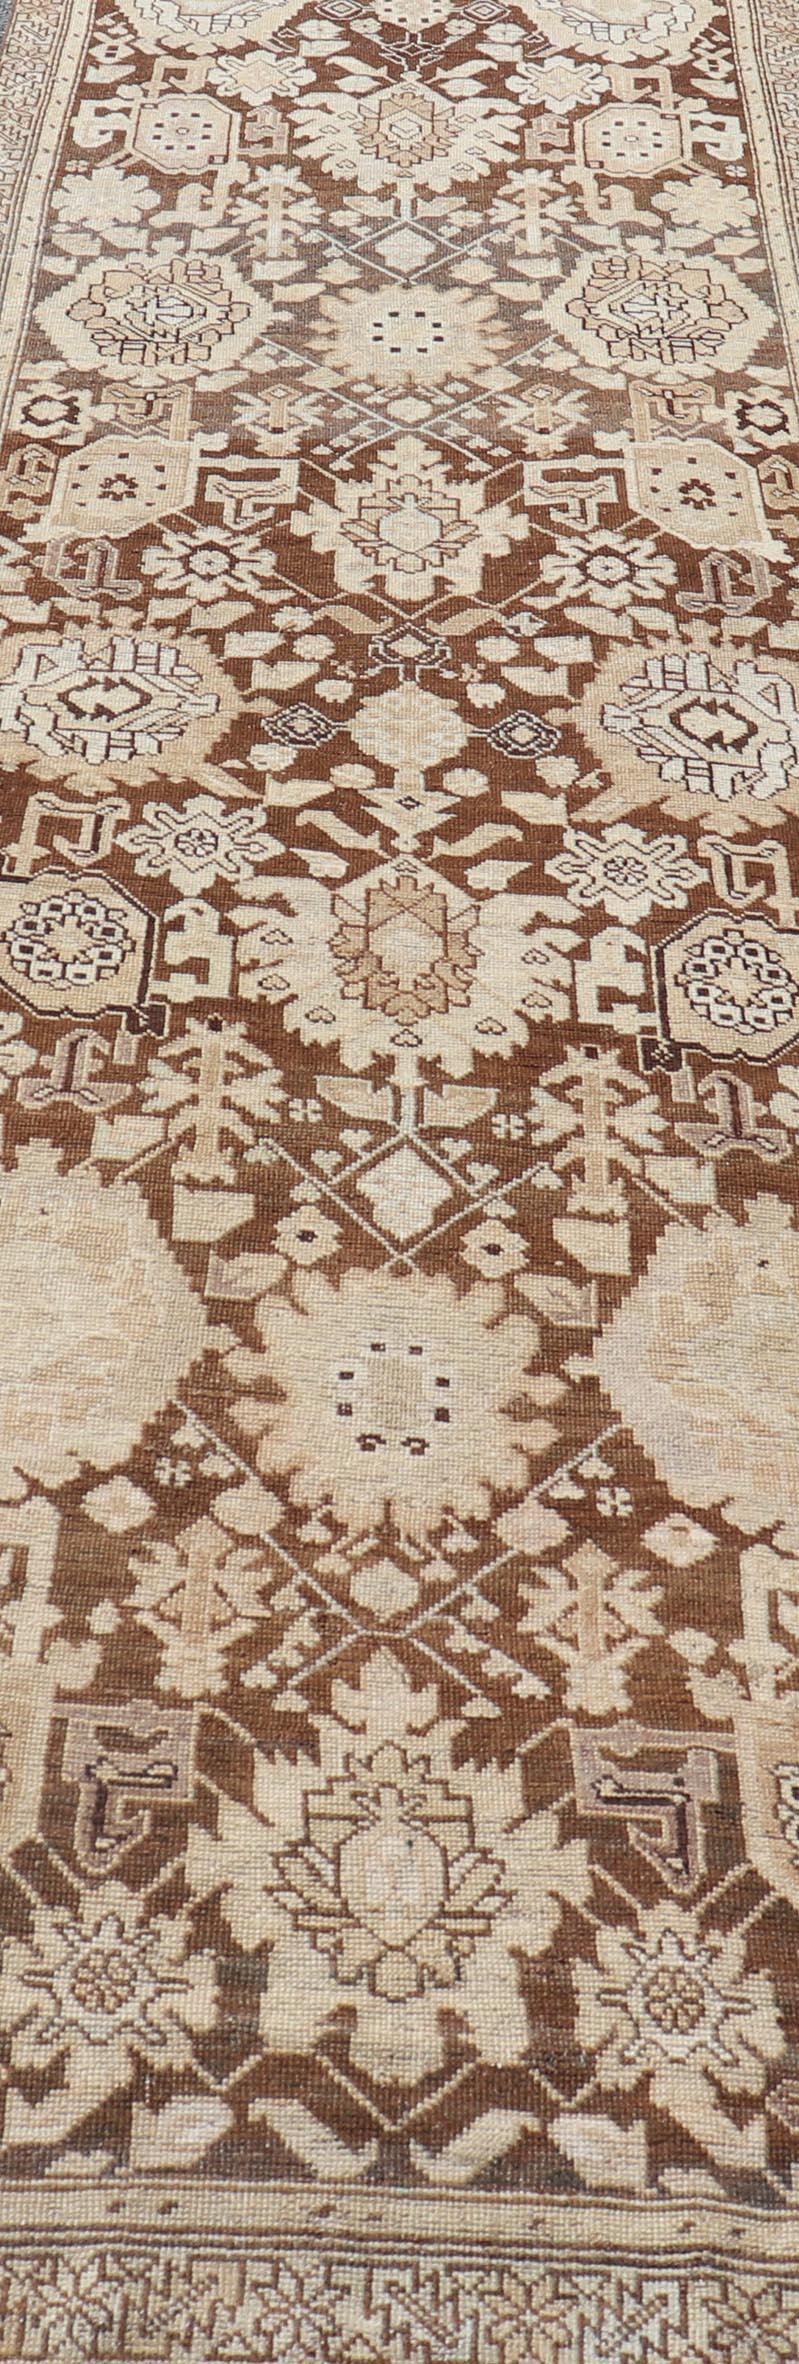 Caucasian Antique Karabagh Runner with All-Over Floral Medallion Design in Brown and Tan For Sale